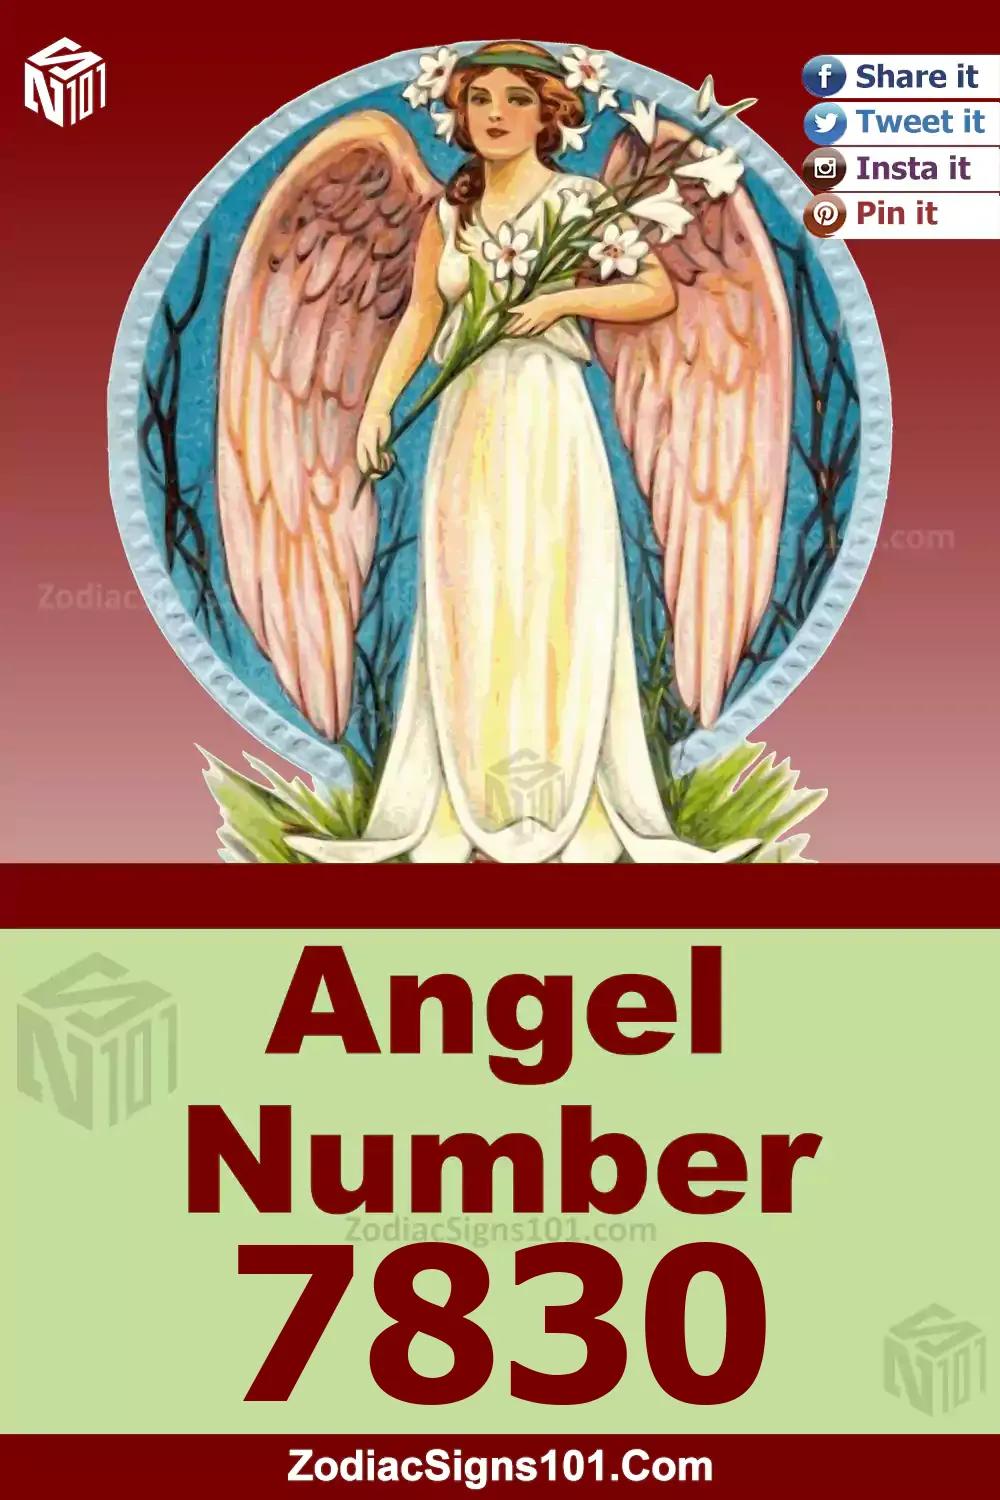 7830 Angel Number Meaning